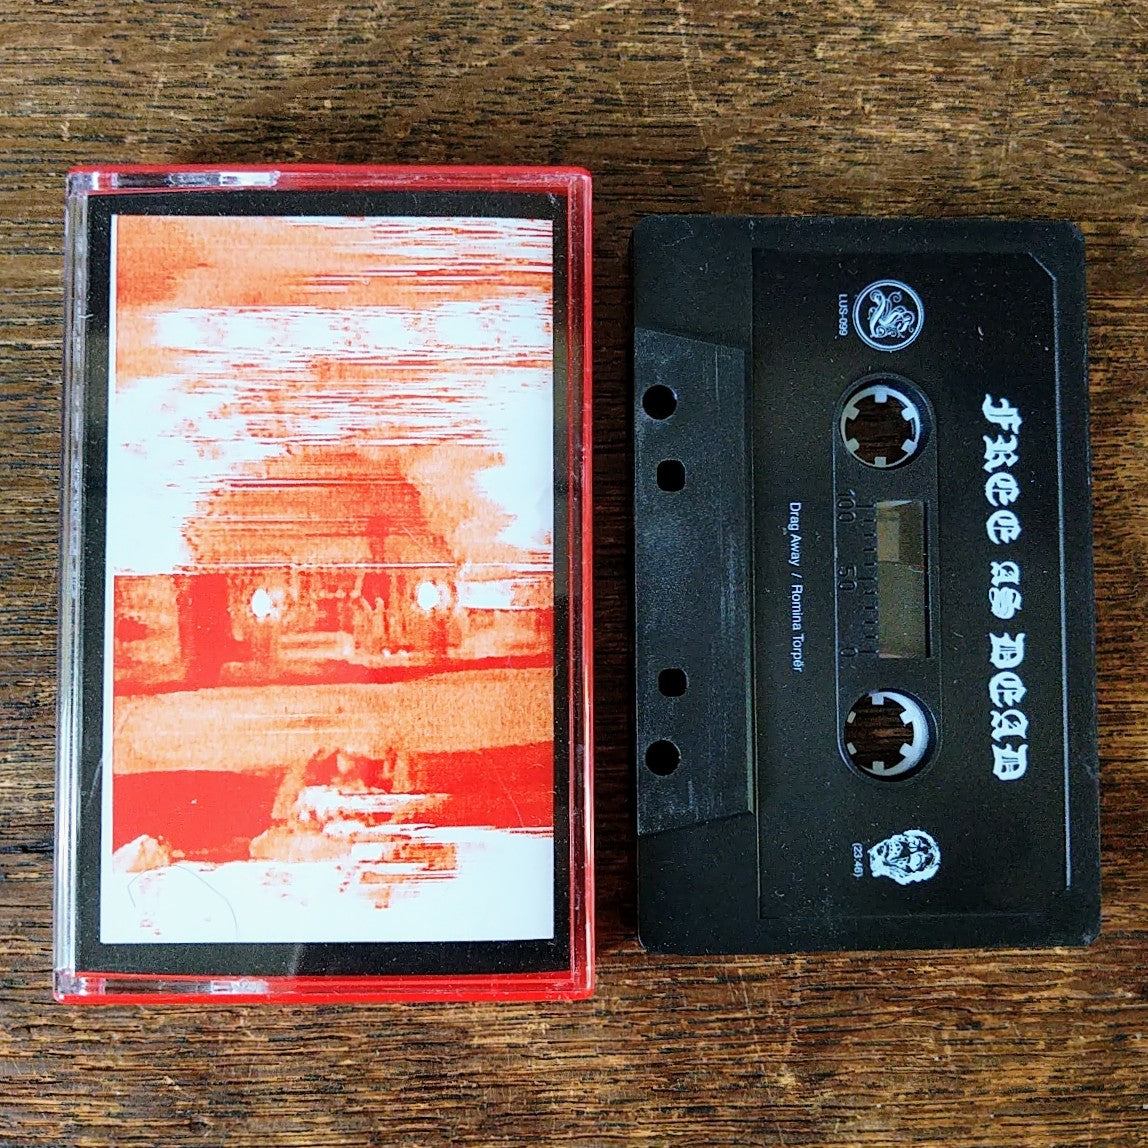 [SOLD OUT] FREE AS DEAD ‎(Original Film Soundtrack) by Romain Perrot & Andy Bolus Cassette Tape (Lim. 100)